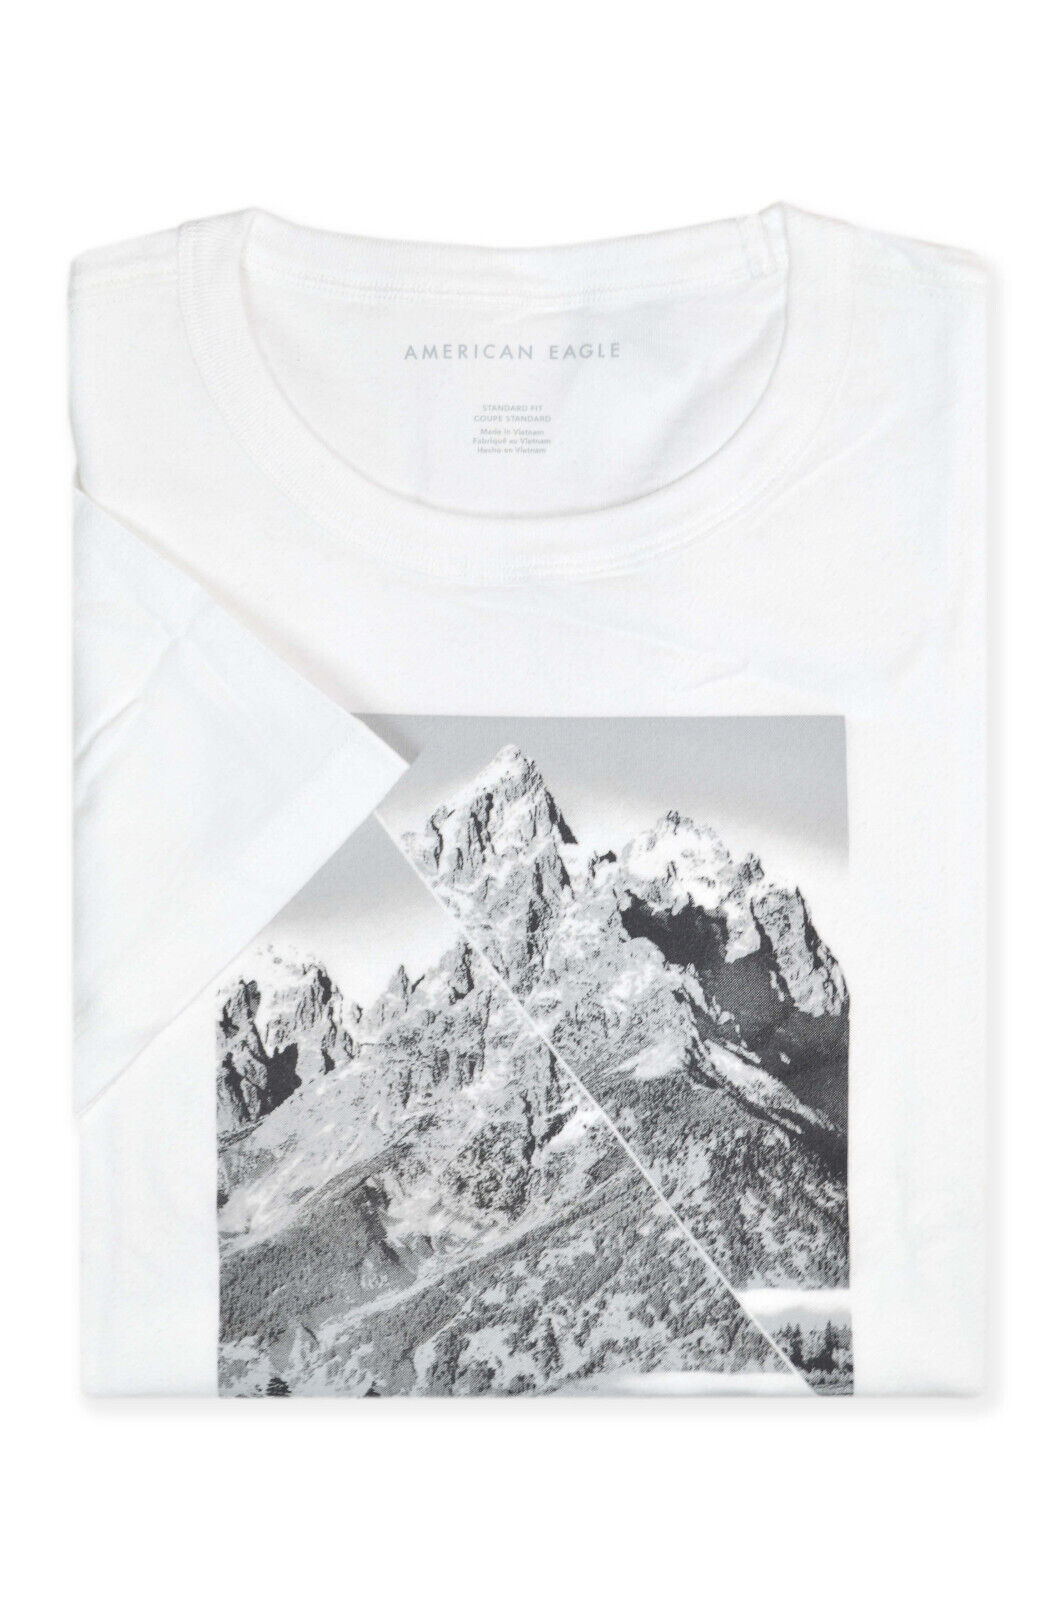 American Eagle Men's White Short Sleeve Mountain  Graphic Tee, S Small 3098-6 - $24.70